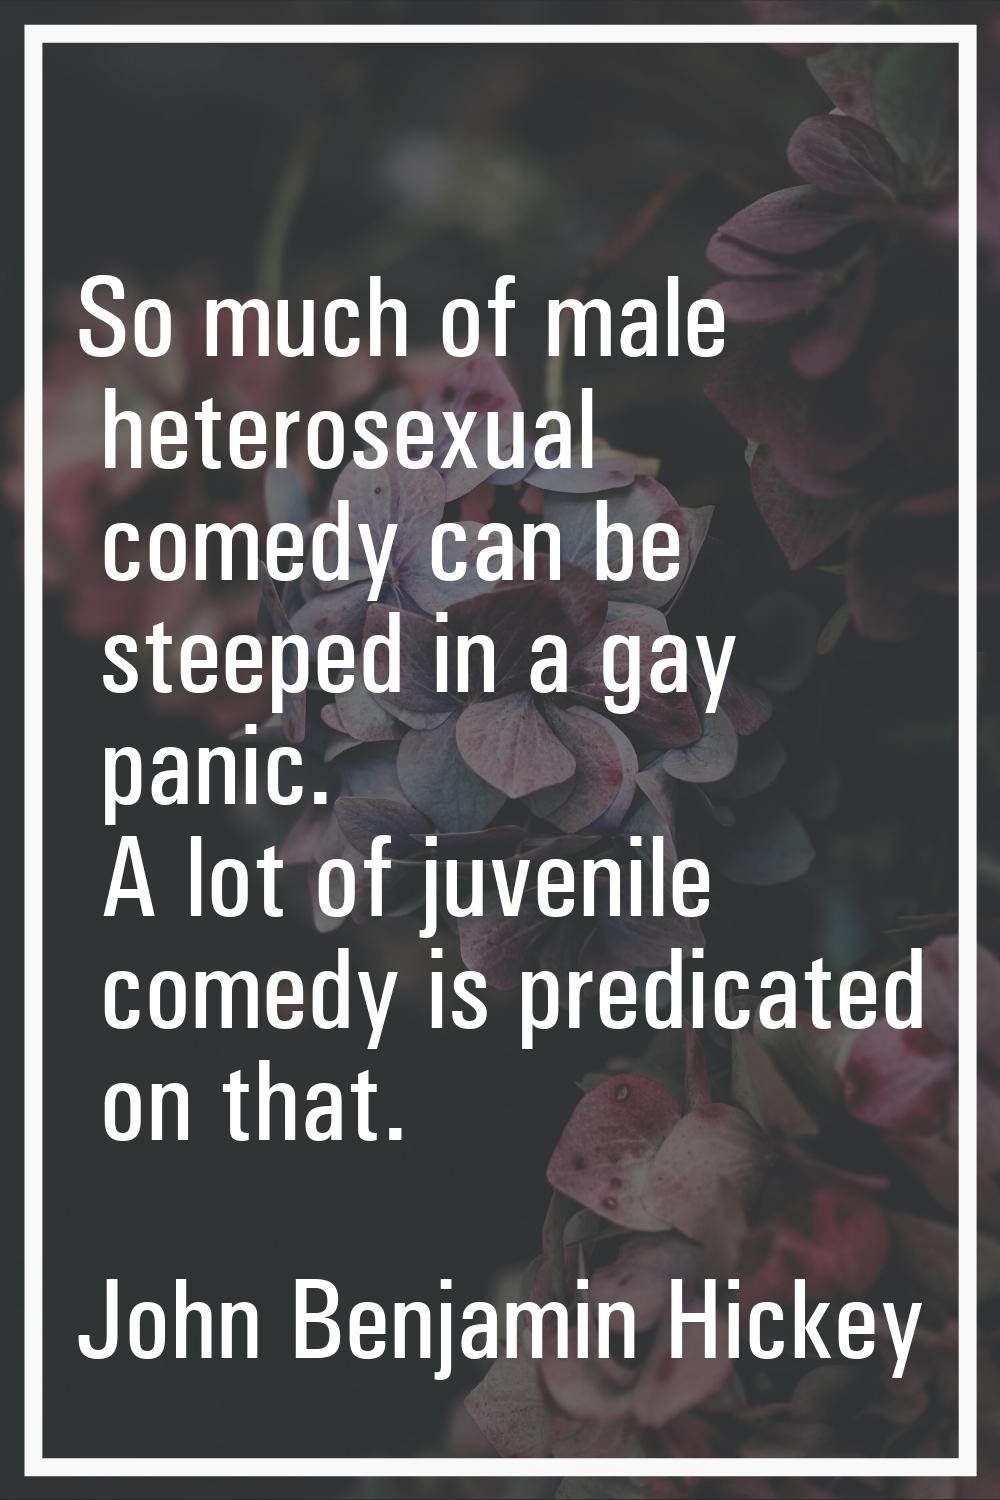 So much of male heterosexual comedy can be steeped in a gay panic. A lot of juvenile comedy is pred